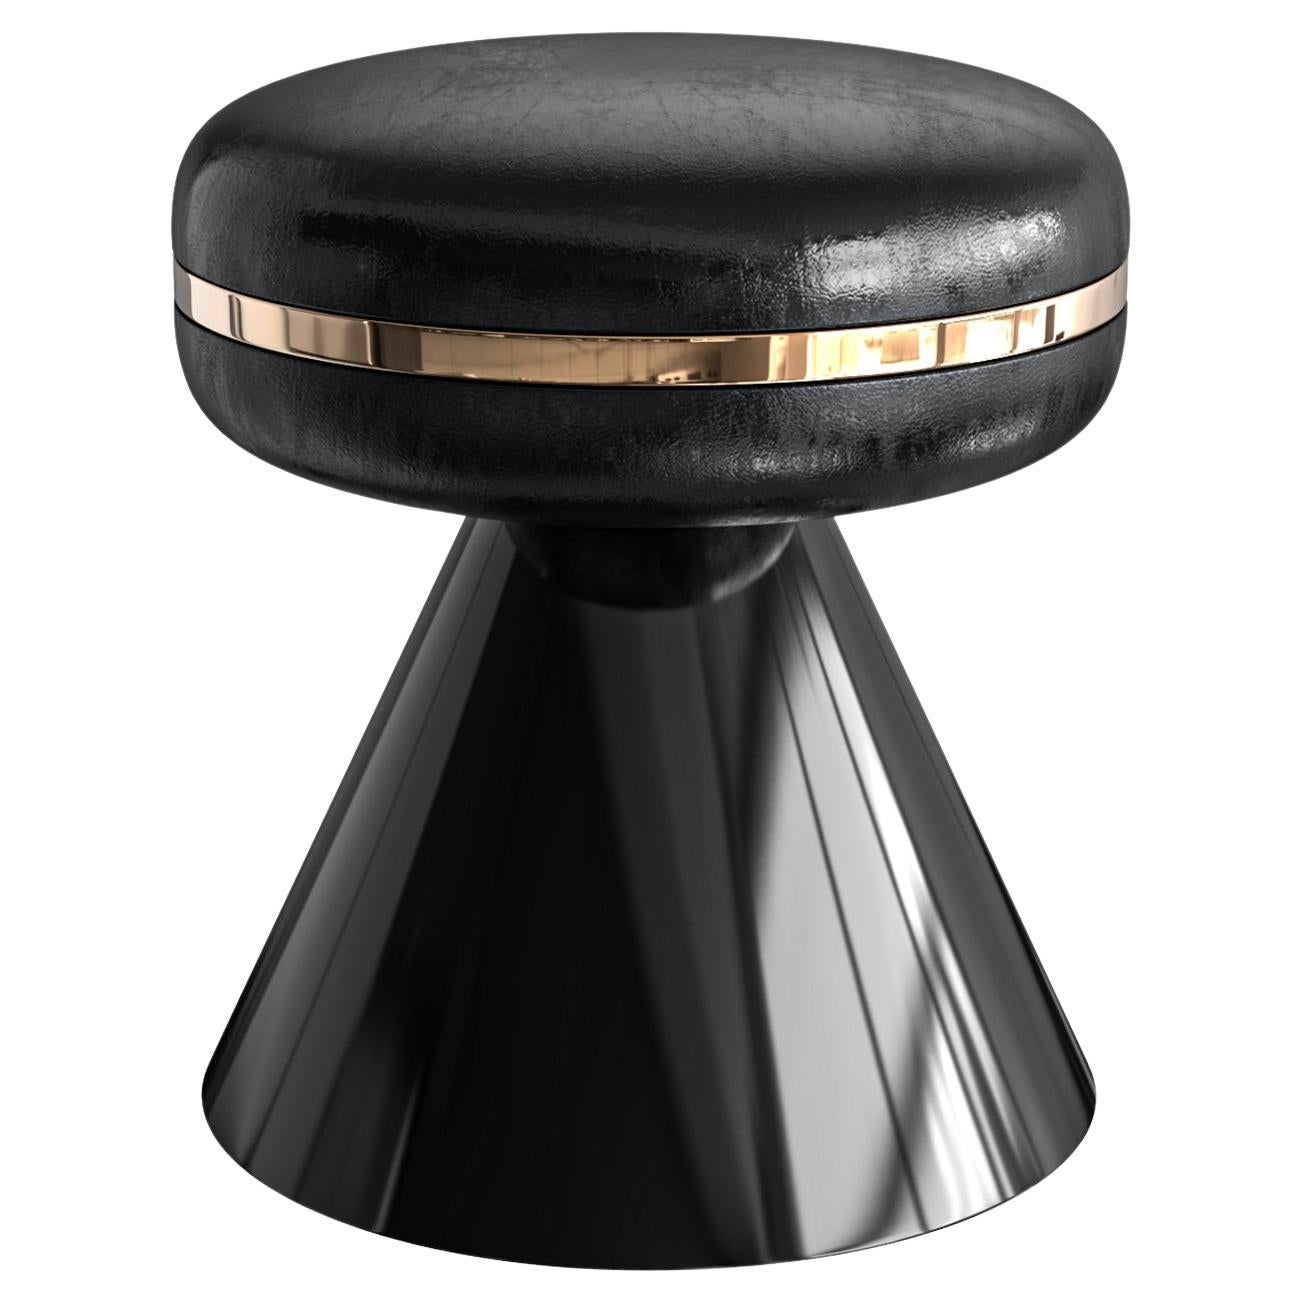 "Coraggioso" Ottoman & Pouf with Stainless Steel and Bronze Details, Istanbul